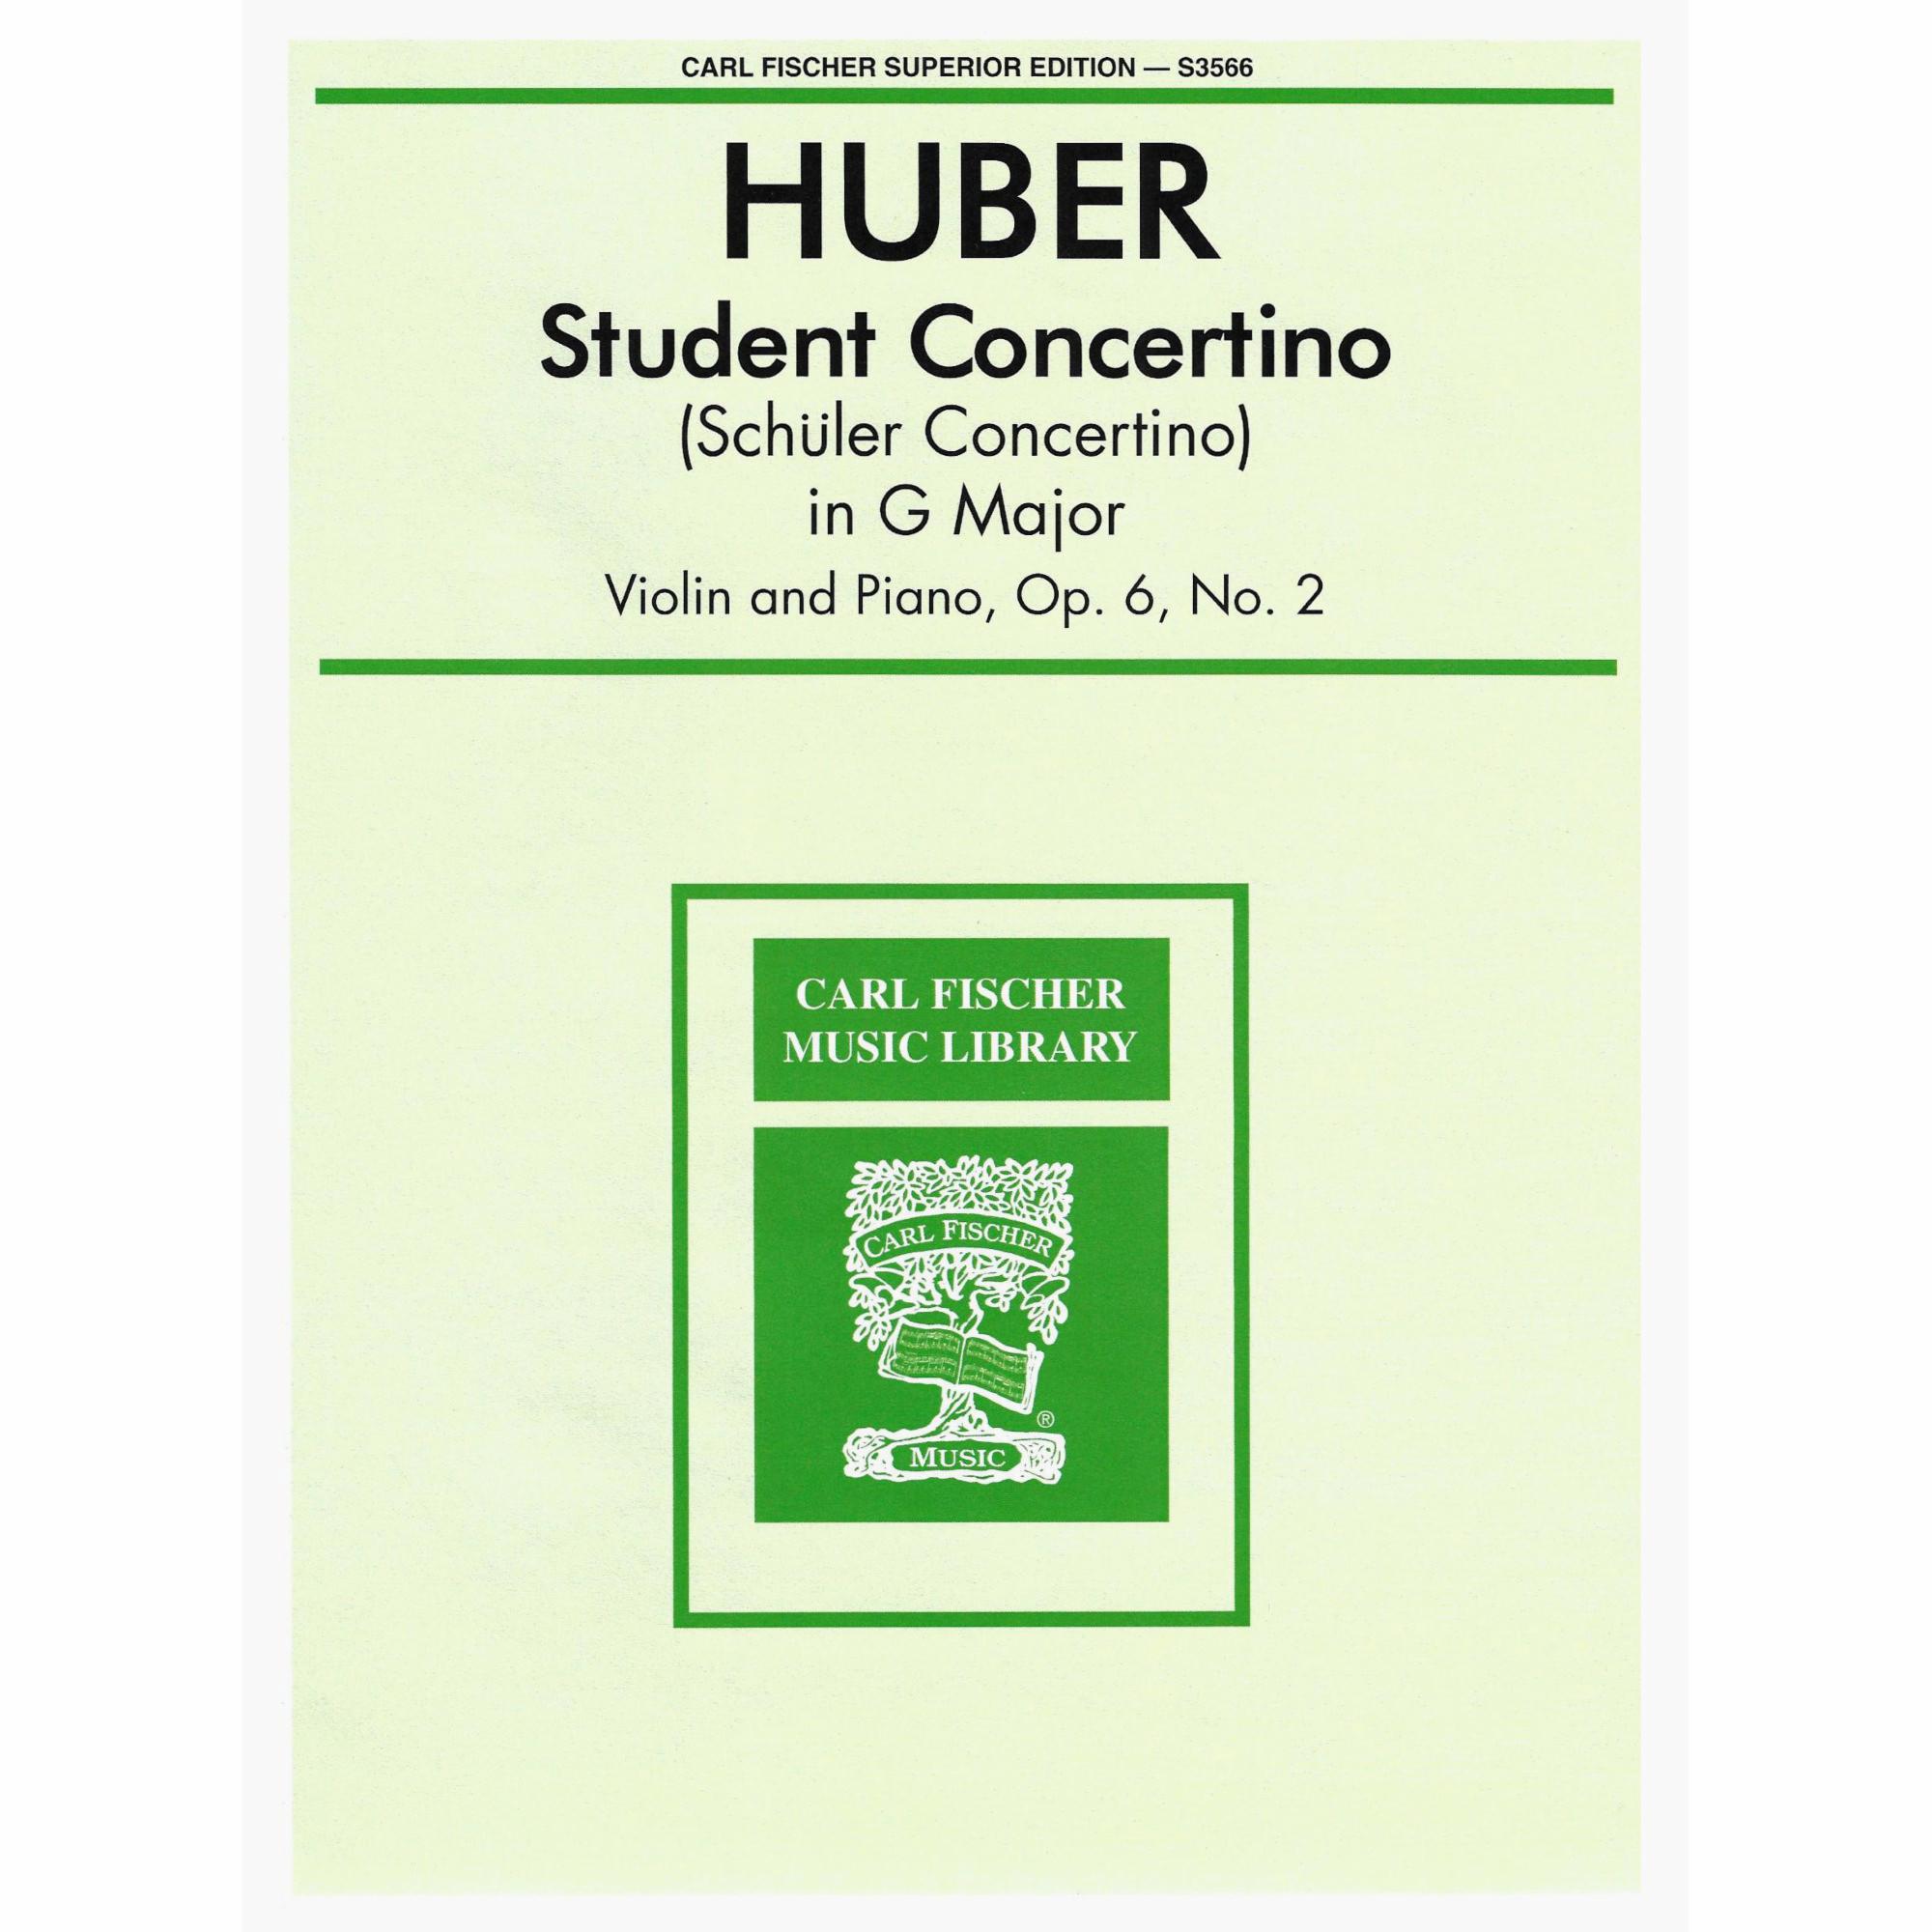 Huber -- Student Concertino in G Major, Op. 6, No. 2 for Violin and Piano